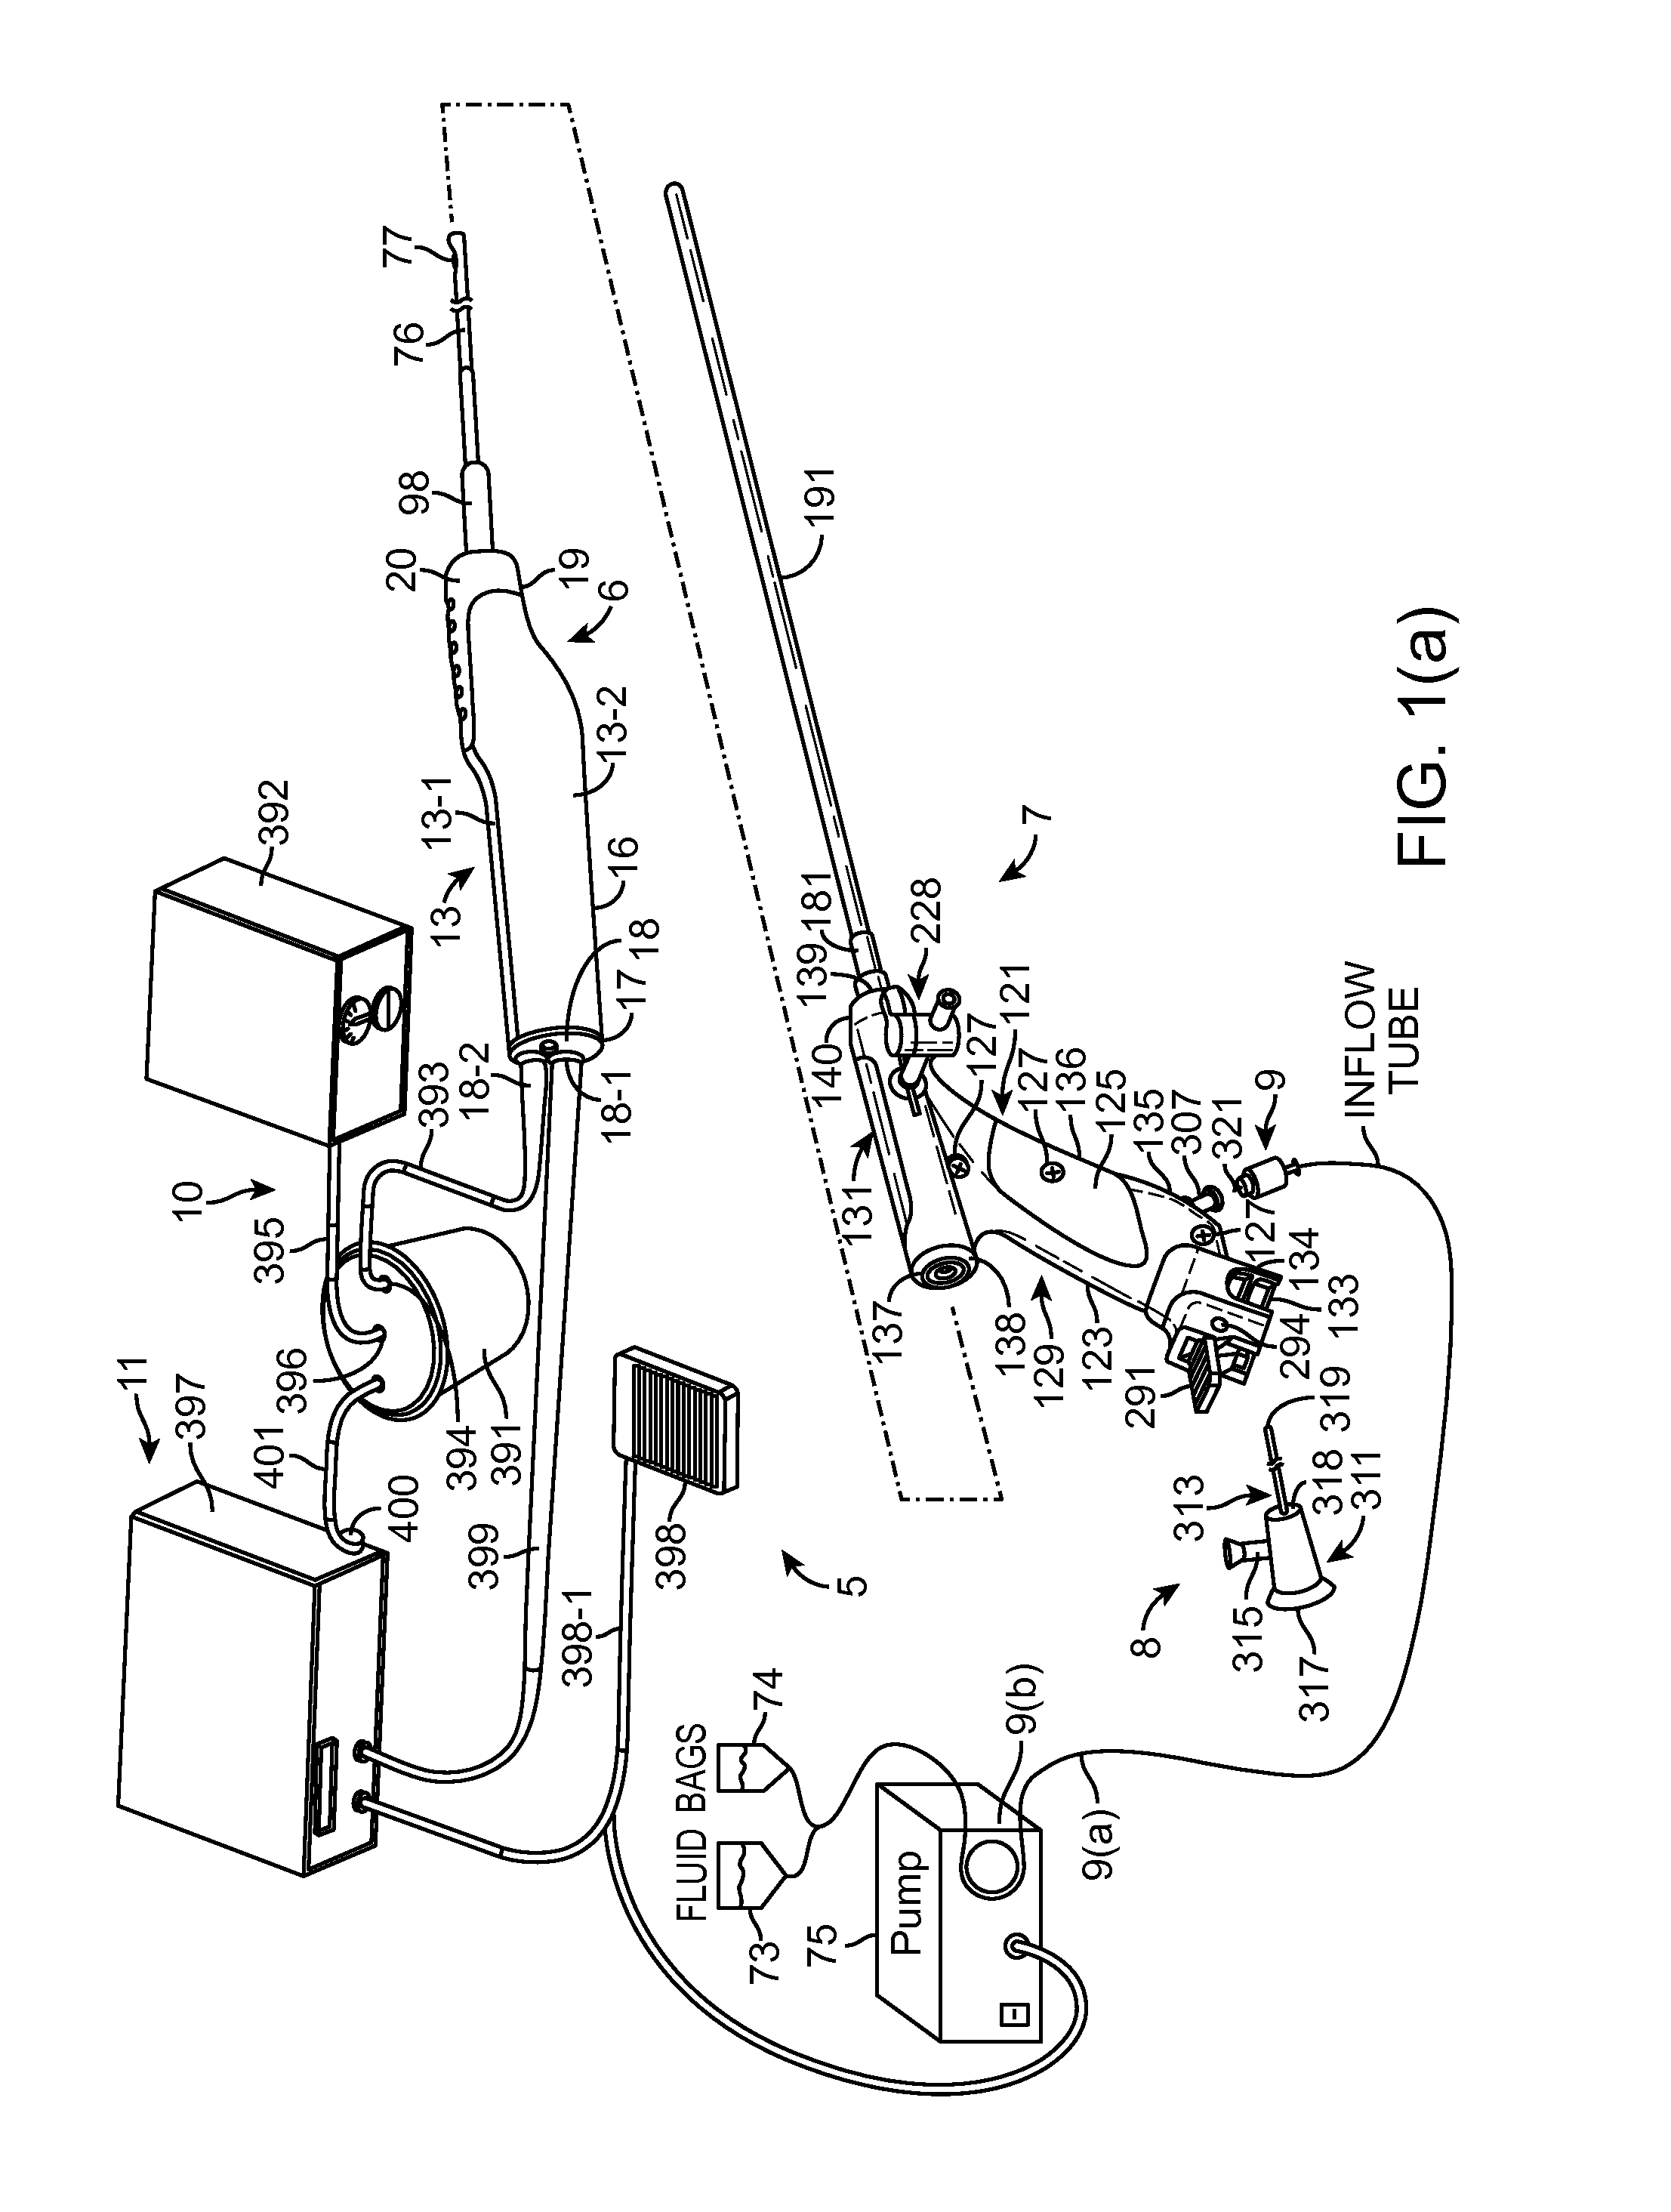 Hysteroscopic tissue removal system with improved fluid management and/or monitoring capabilities